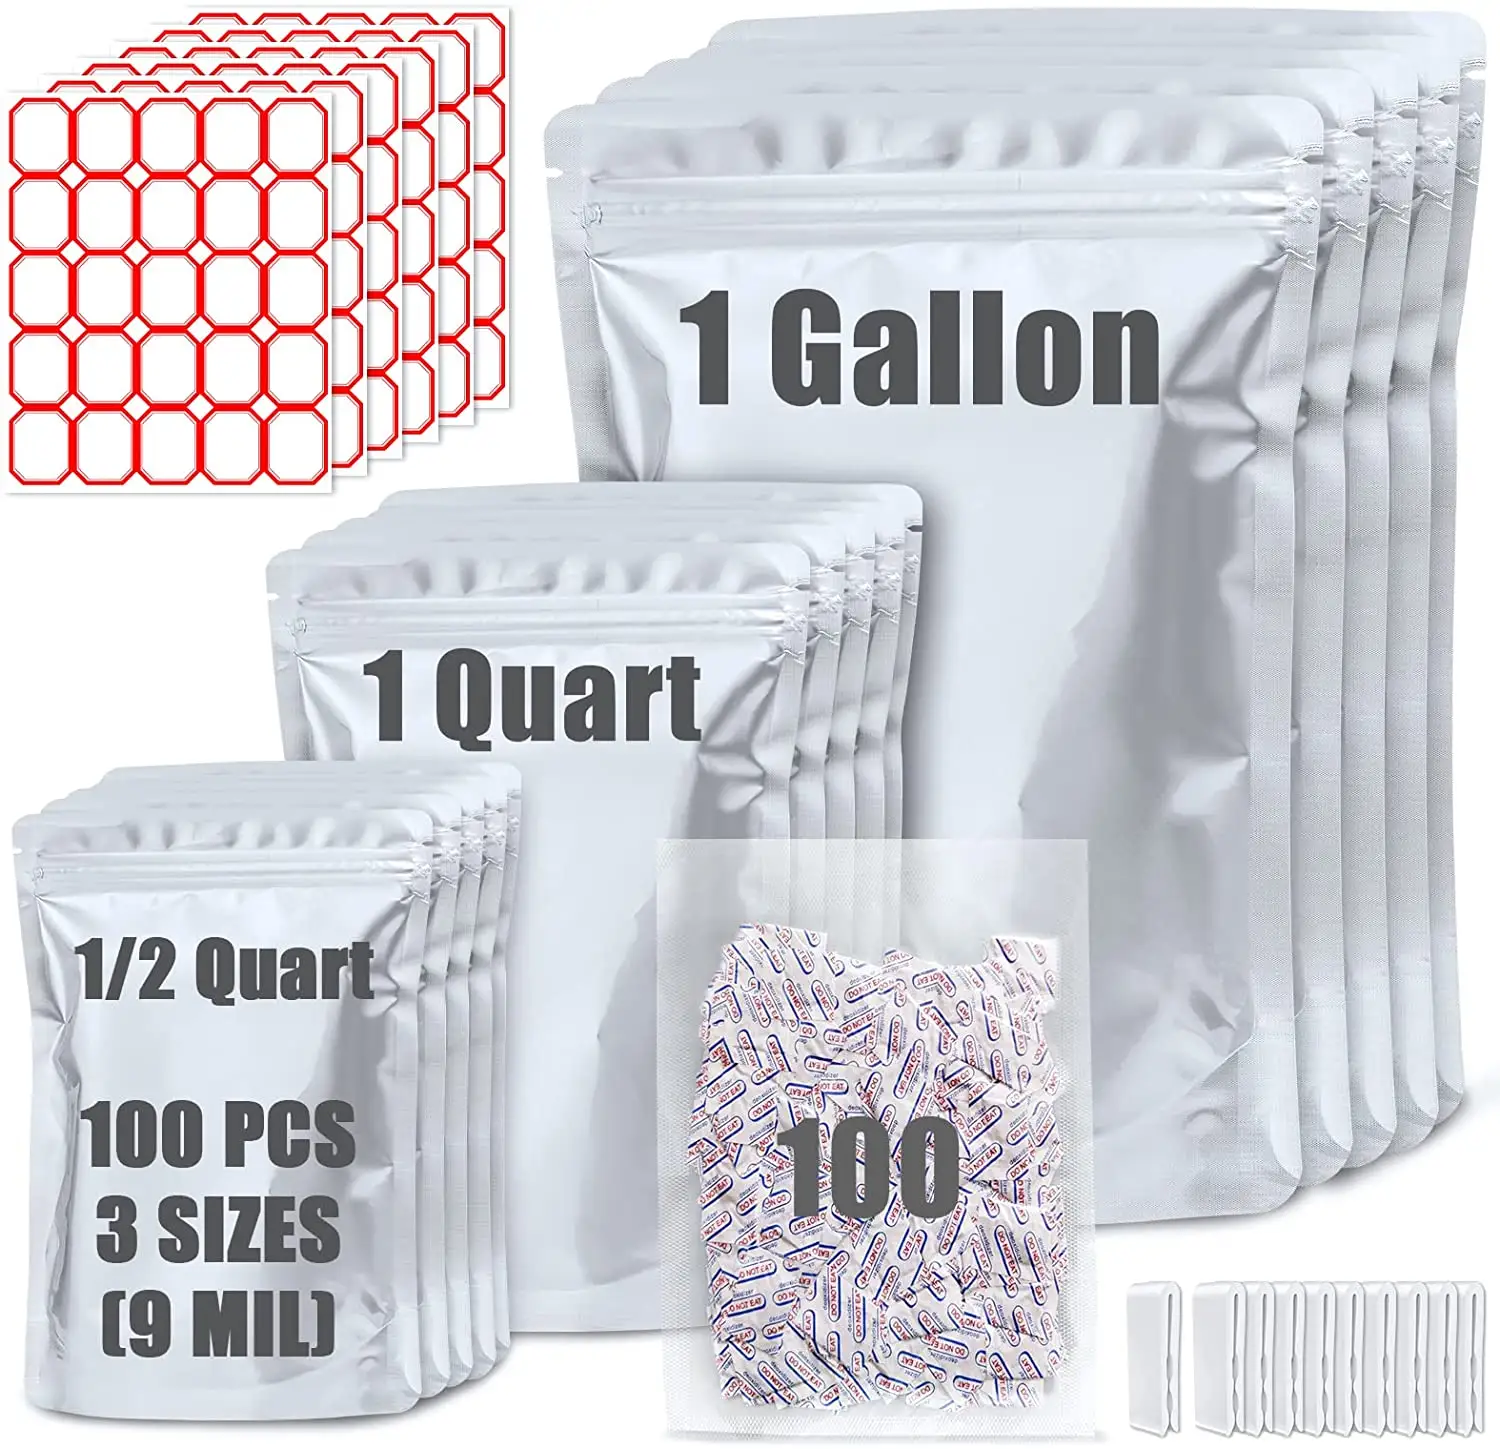 Amazon Best Seller Aluminum 5mil 7mil Resealable Zipper 1gallon 5 gallon Edible Mylar Bags Customized With Oxygen Absorbers